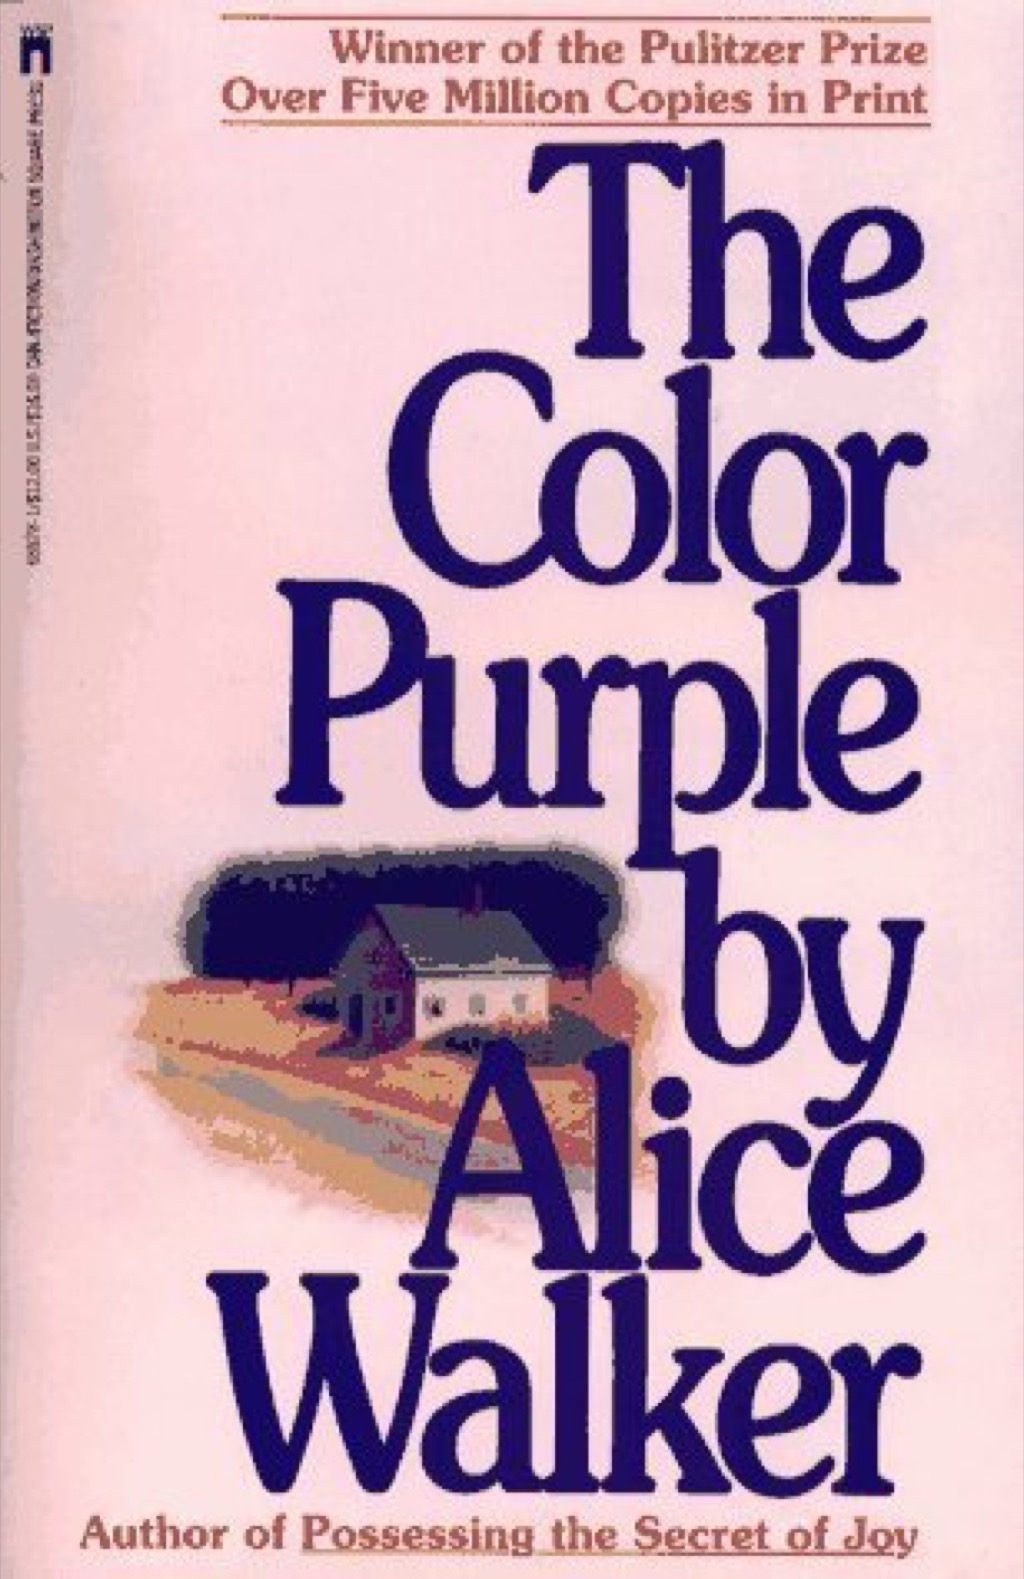 The Color Purple by Alice Walker books every woman should read in her 40s